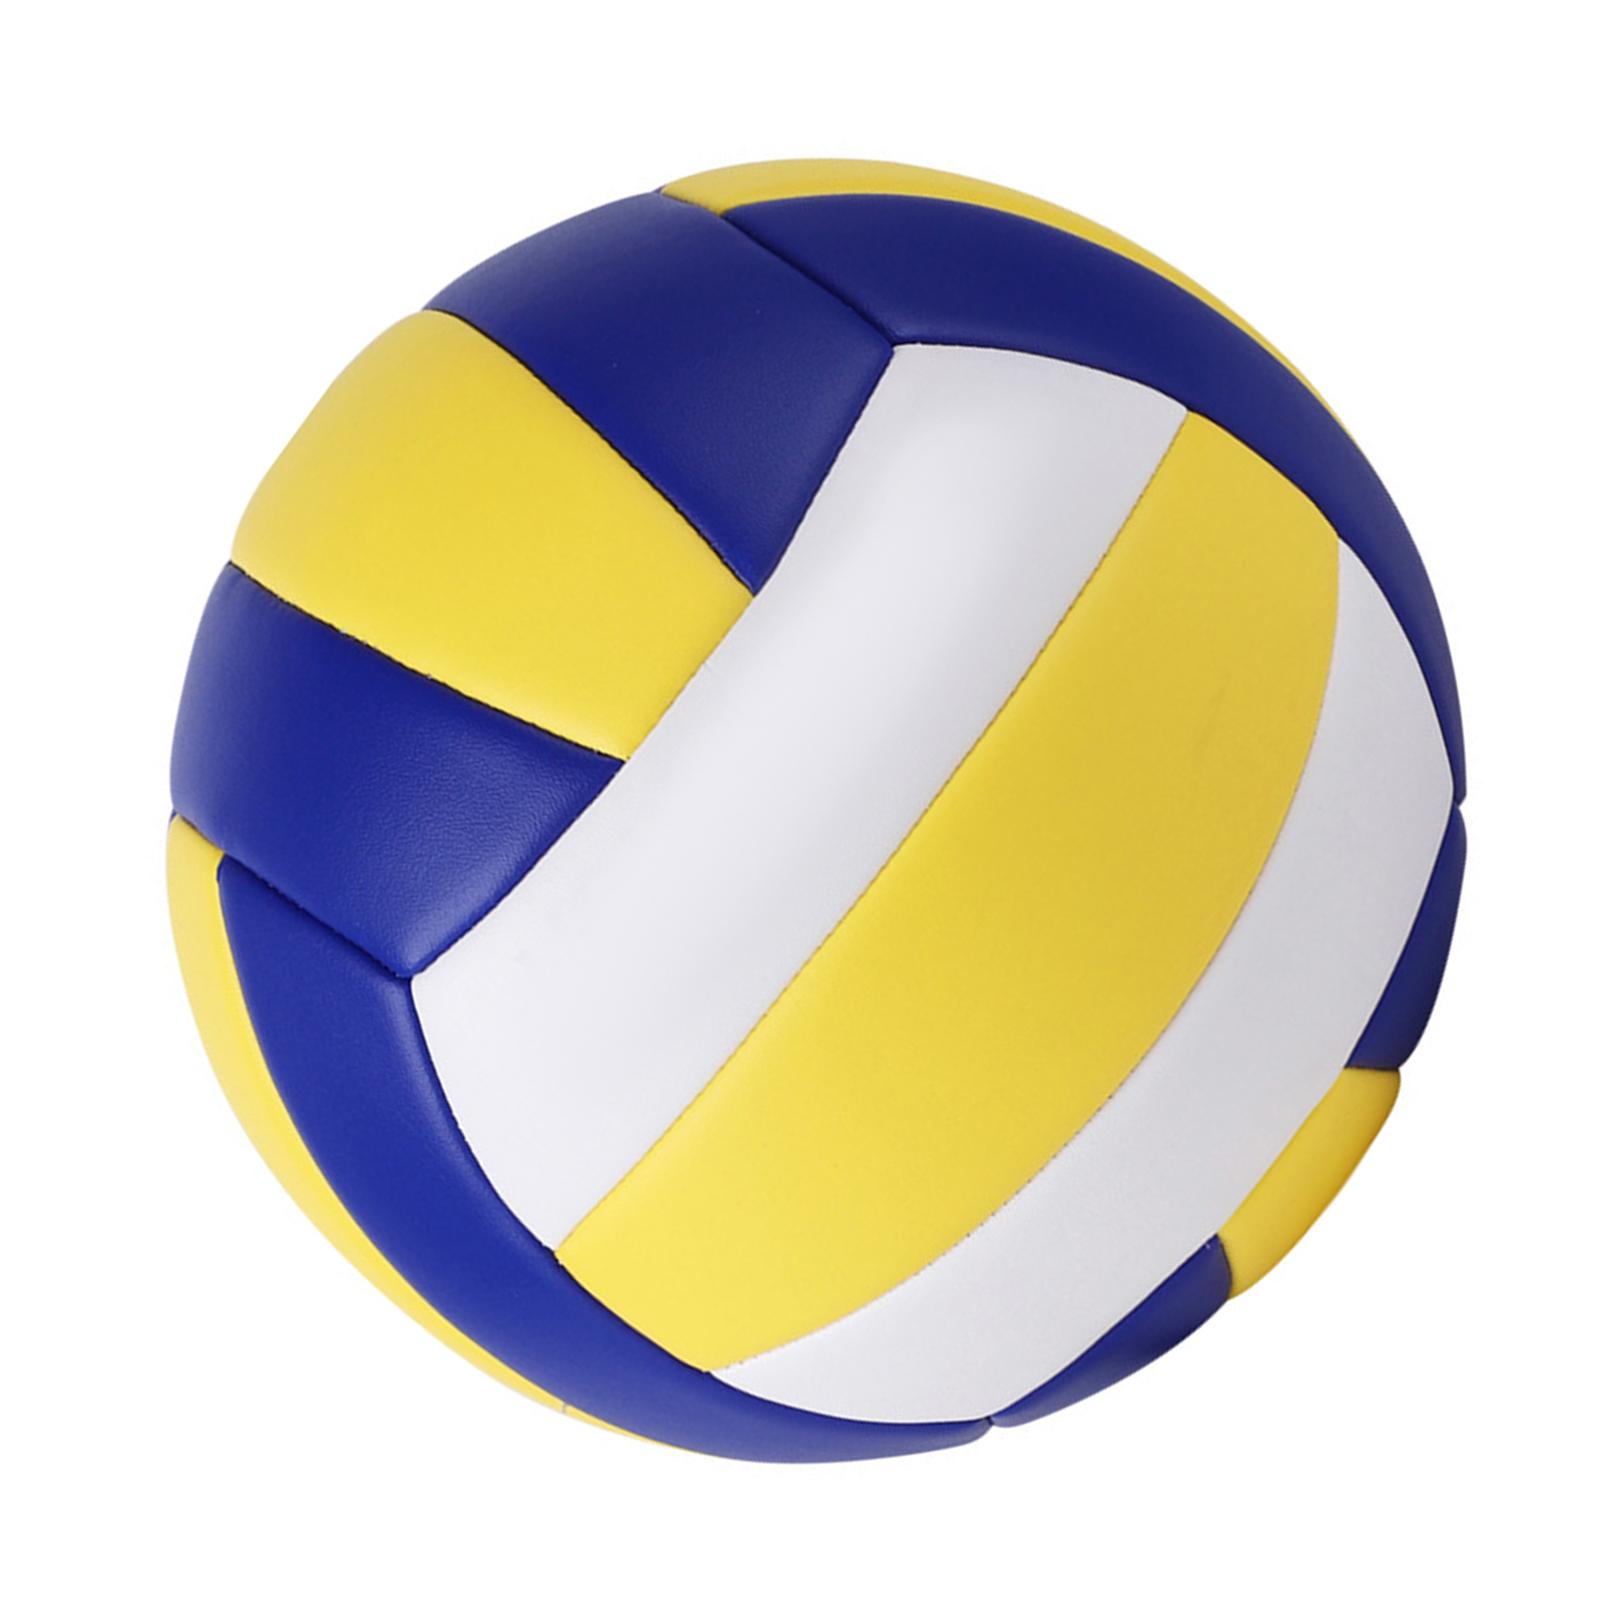 Professional Indoor Volleyball PU Leather Outdoor Ball w/ Ball Pump Beach Gym Training play children Beginner Teenager Blue Yellow - image 1 of 11